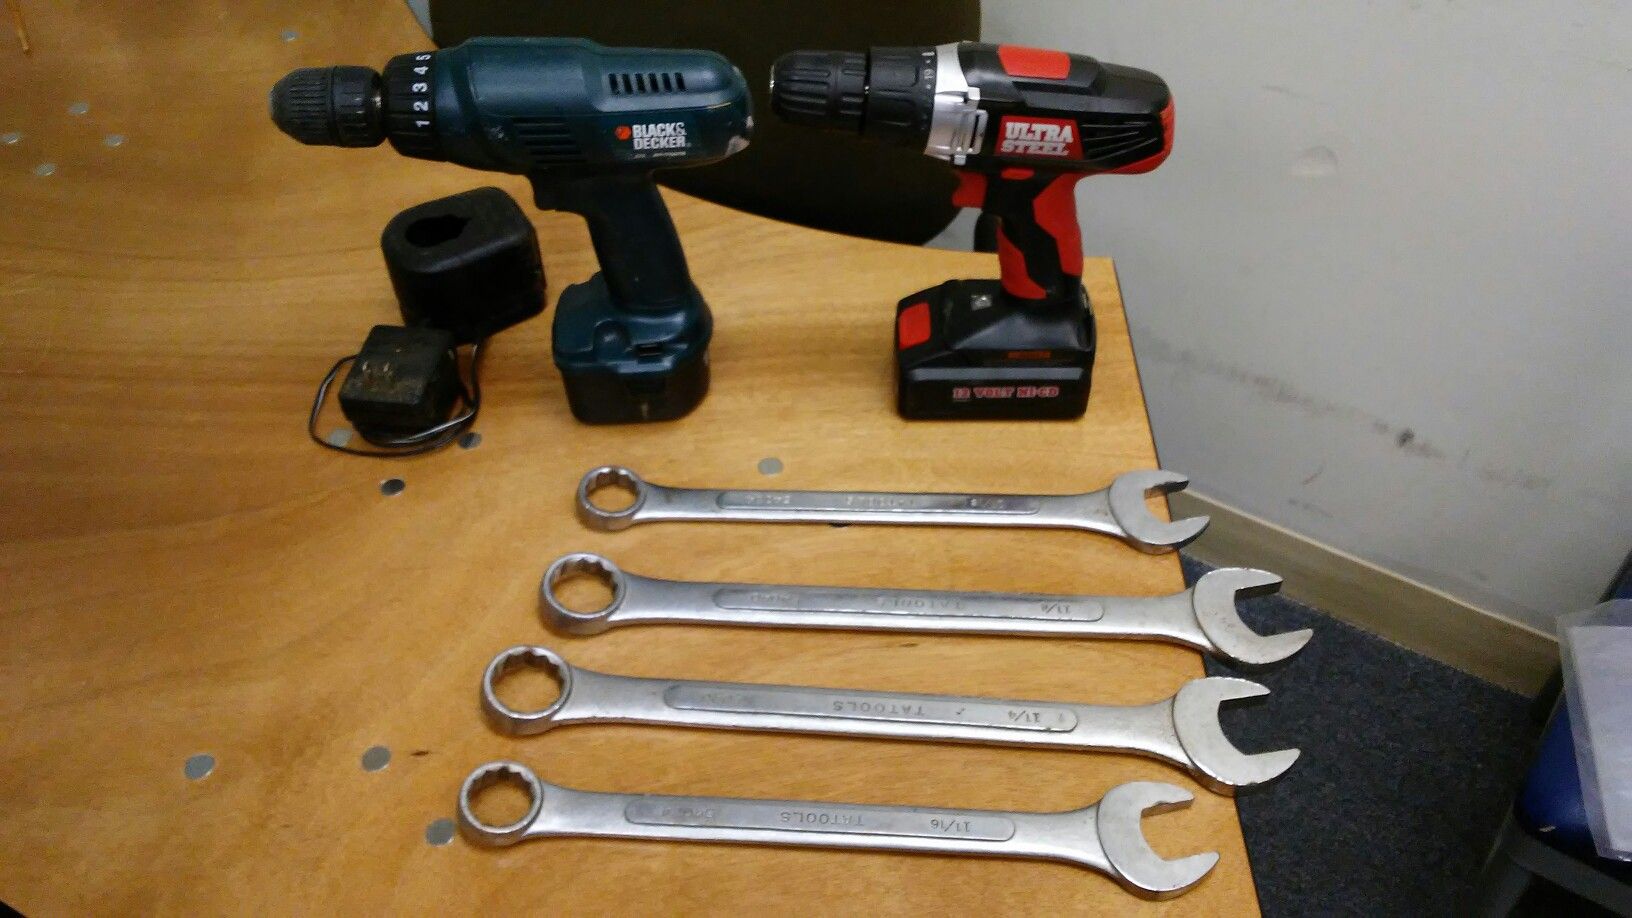 Cordless Drills and Wrenches